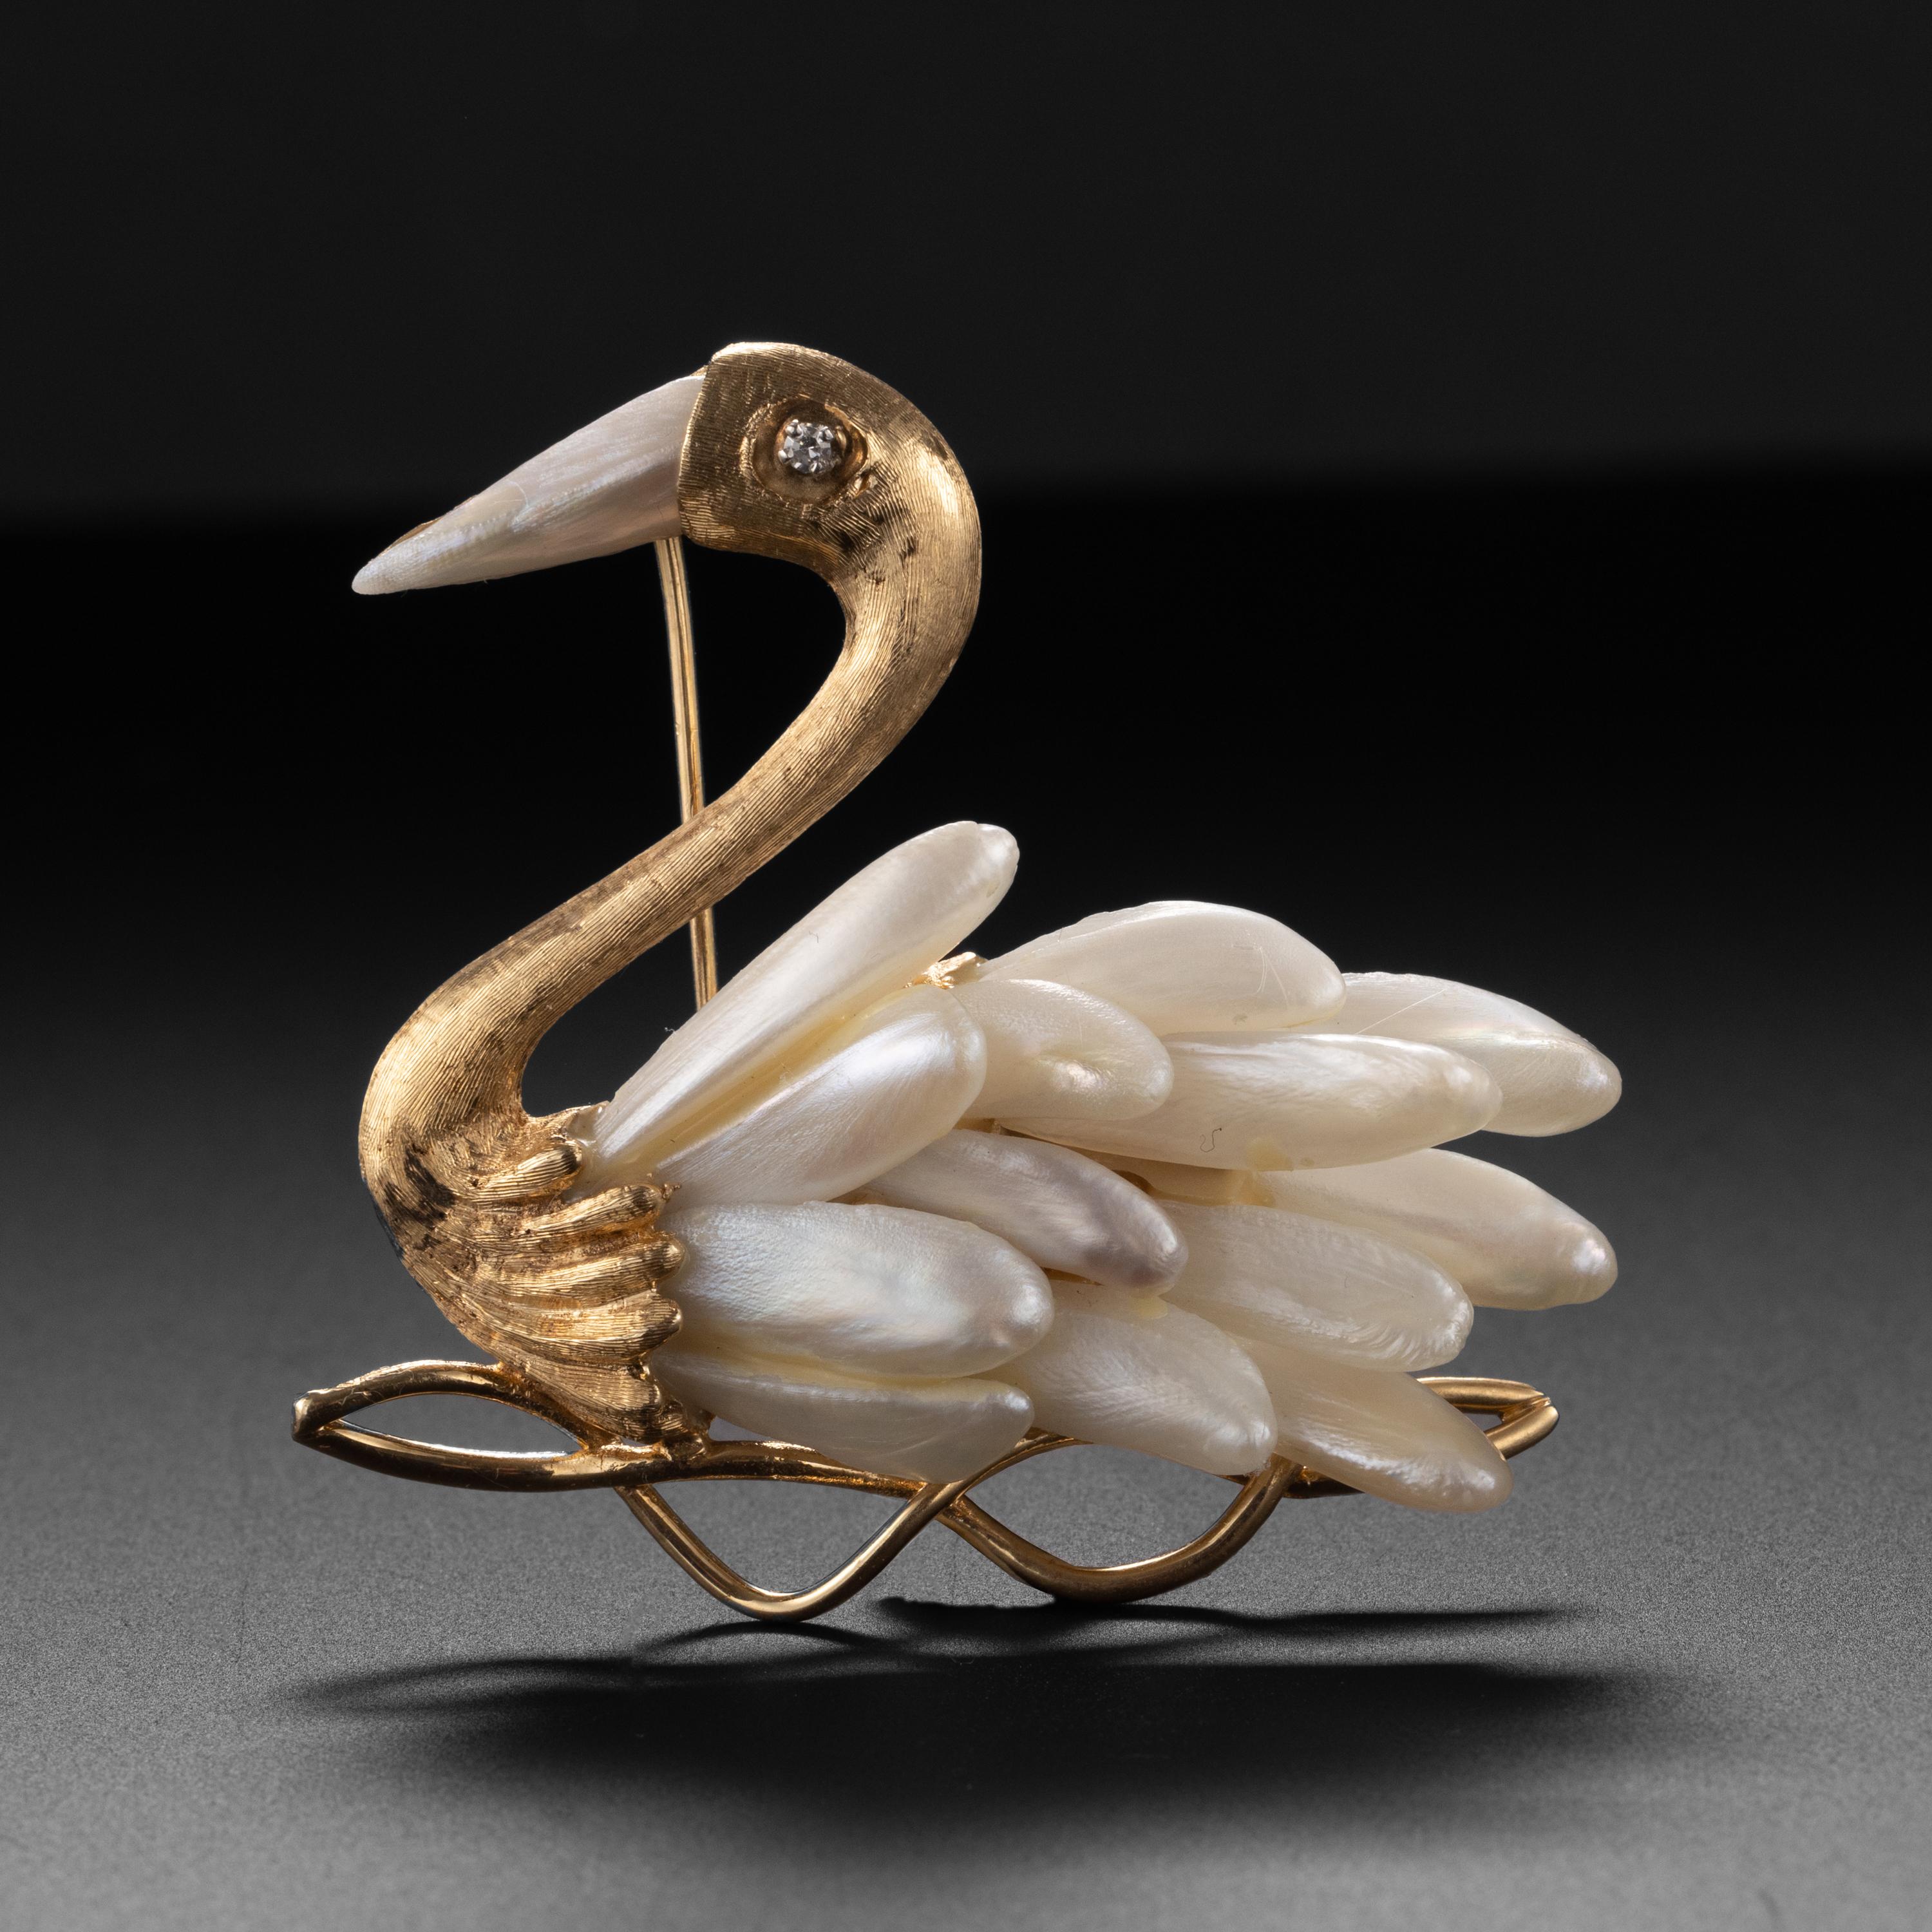 Whimsical and elegant, this highly detailed brooch was skilfully, artistically created entirely by hand in the middle of the previous century (circa 1940s-1950s). Crafted in 18K yellow gold that has been heavily worked, etched by hand to create the